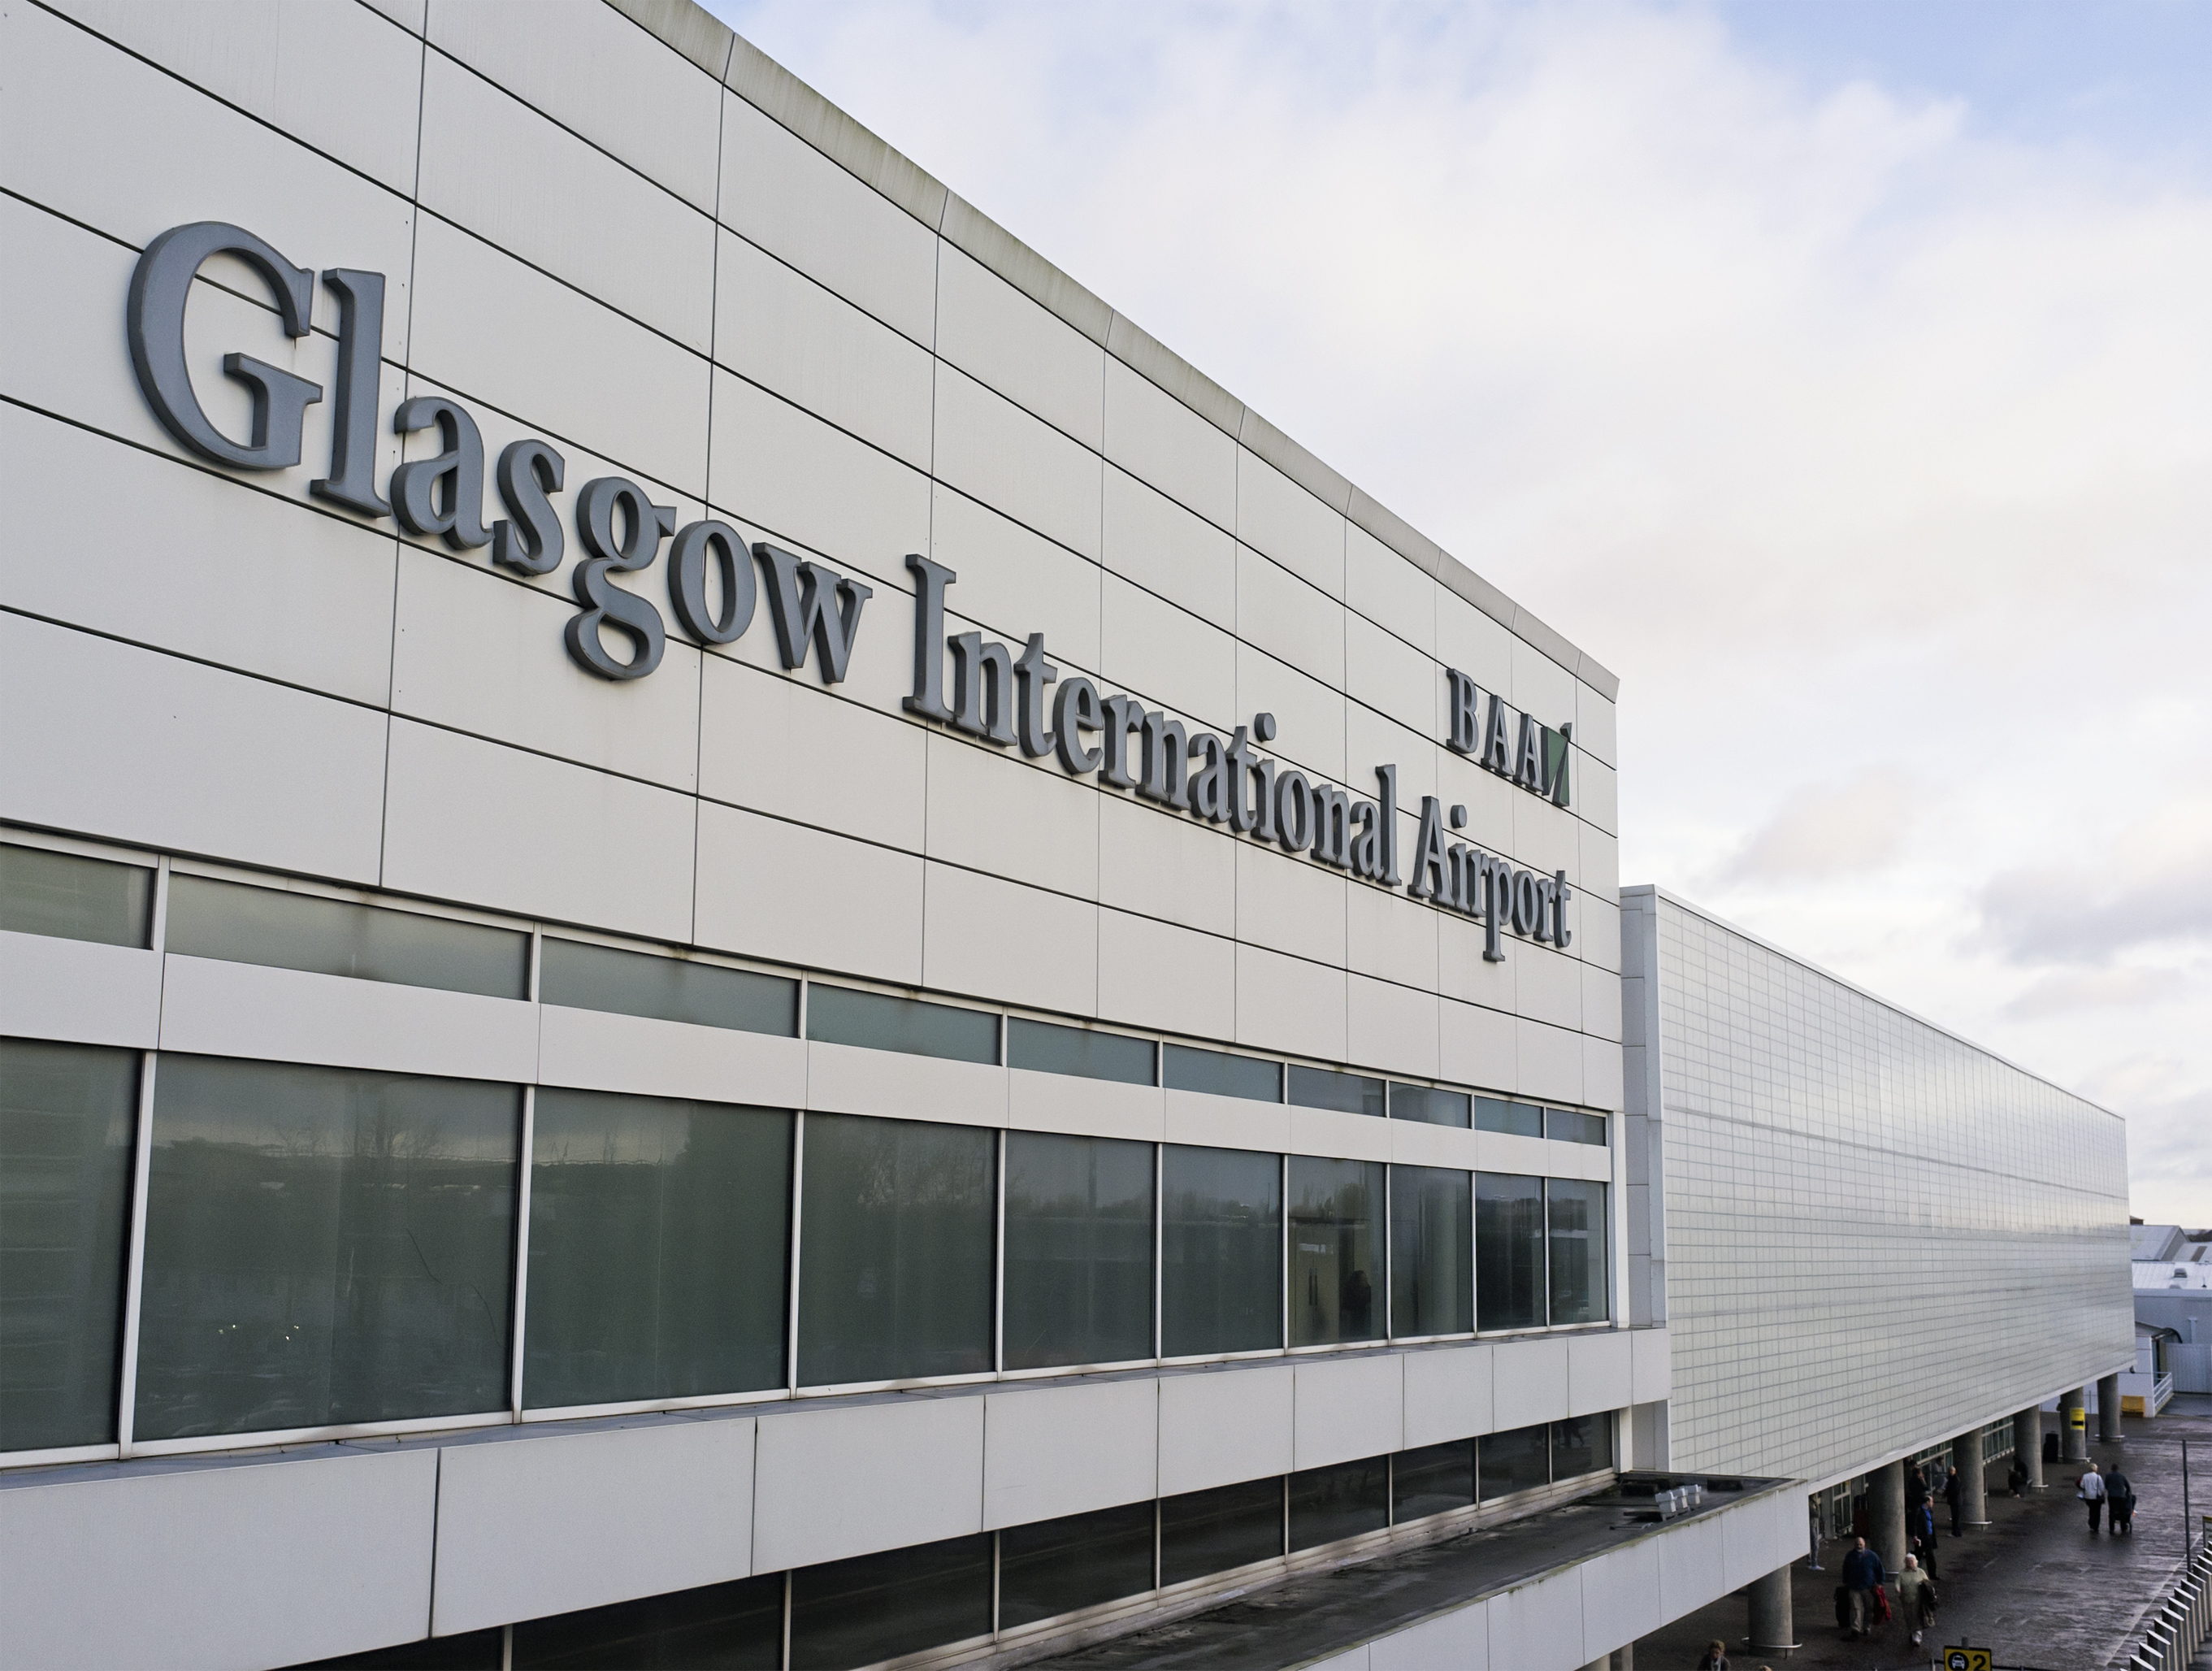 Glasgow Airport set to provide free sanitary products - The Sunday Post